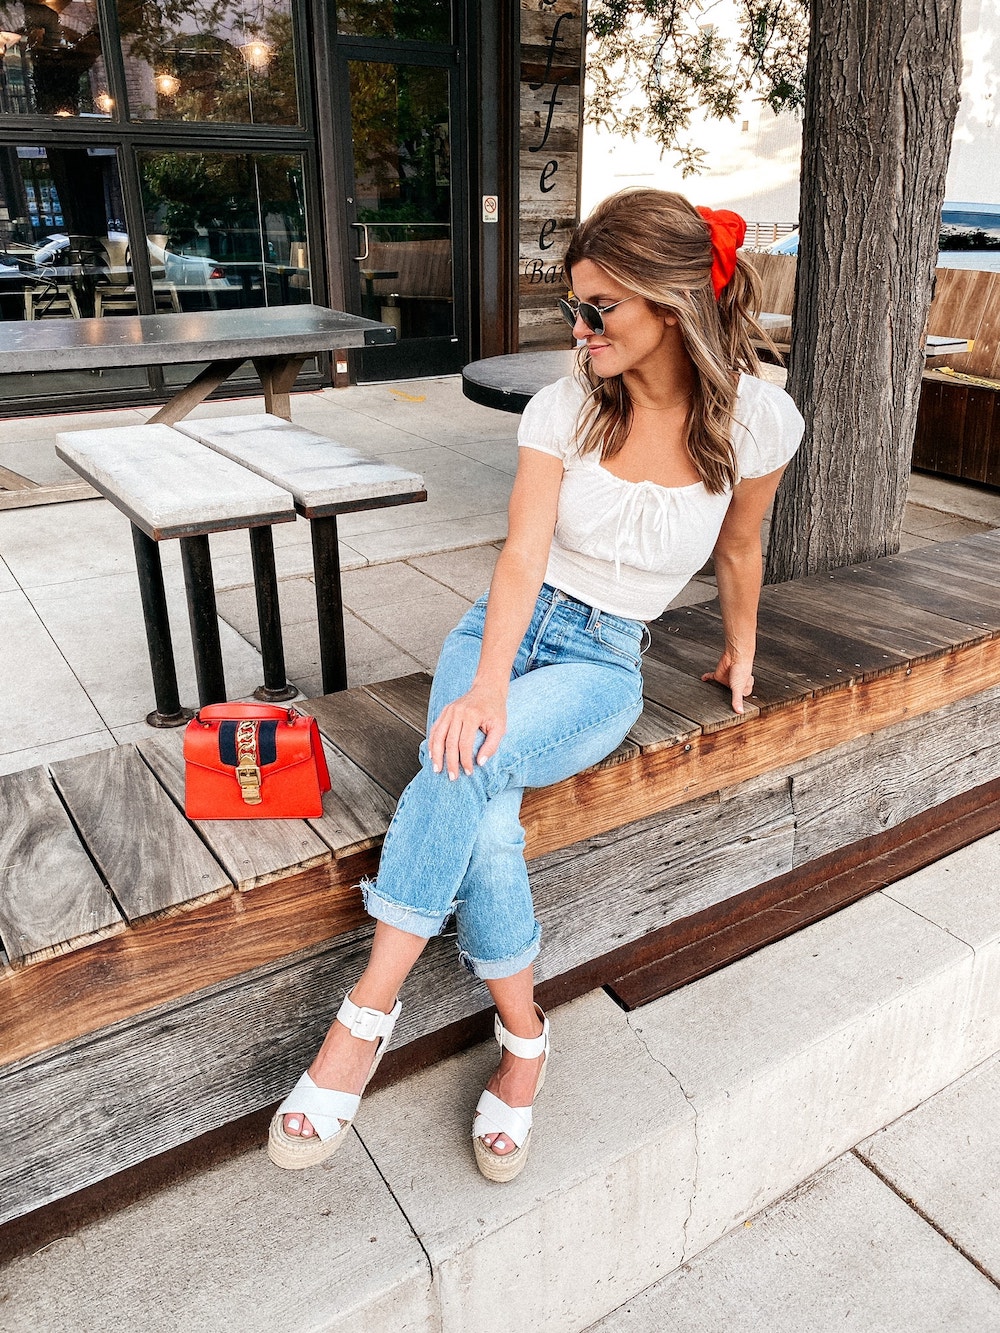 Brighton Butler 4th of July outfit with jeans, white top, and wedges 4th of July sale